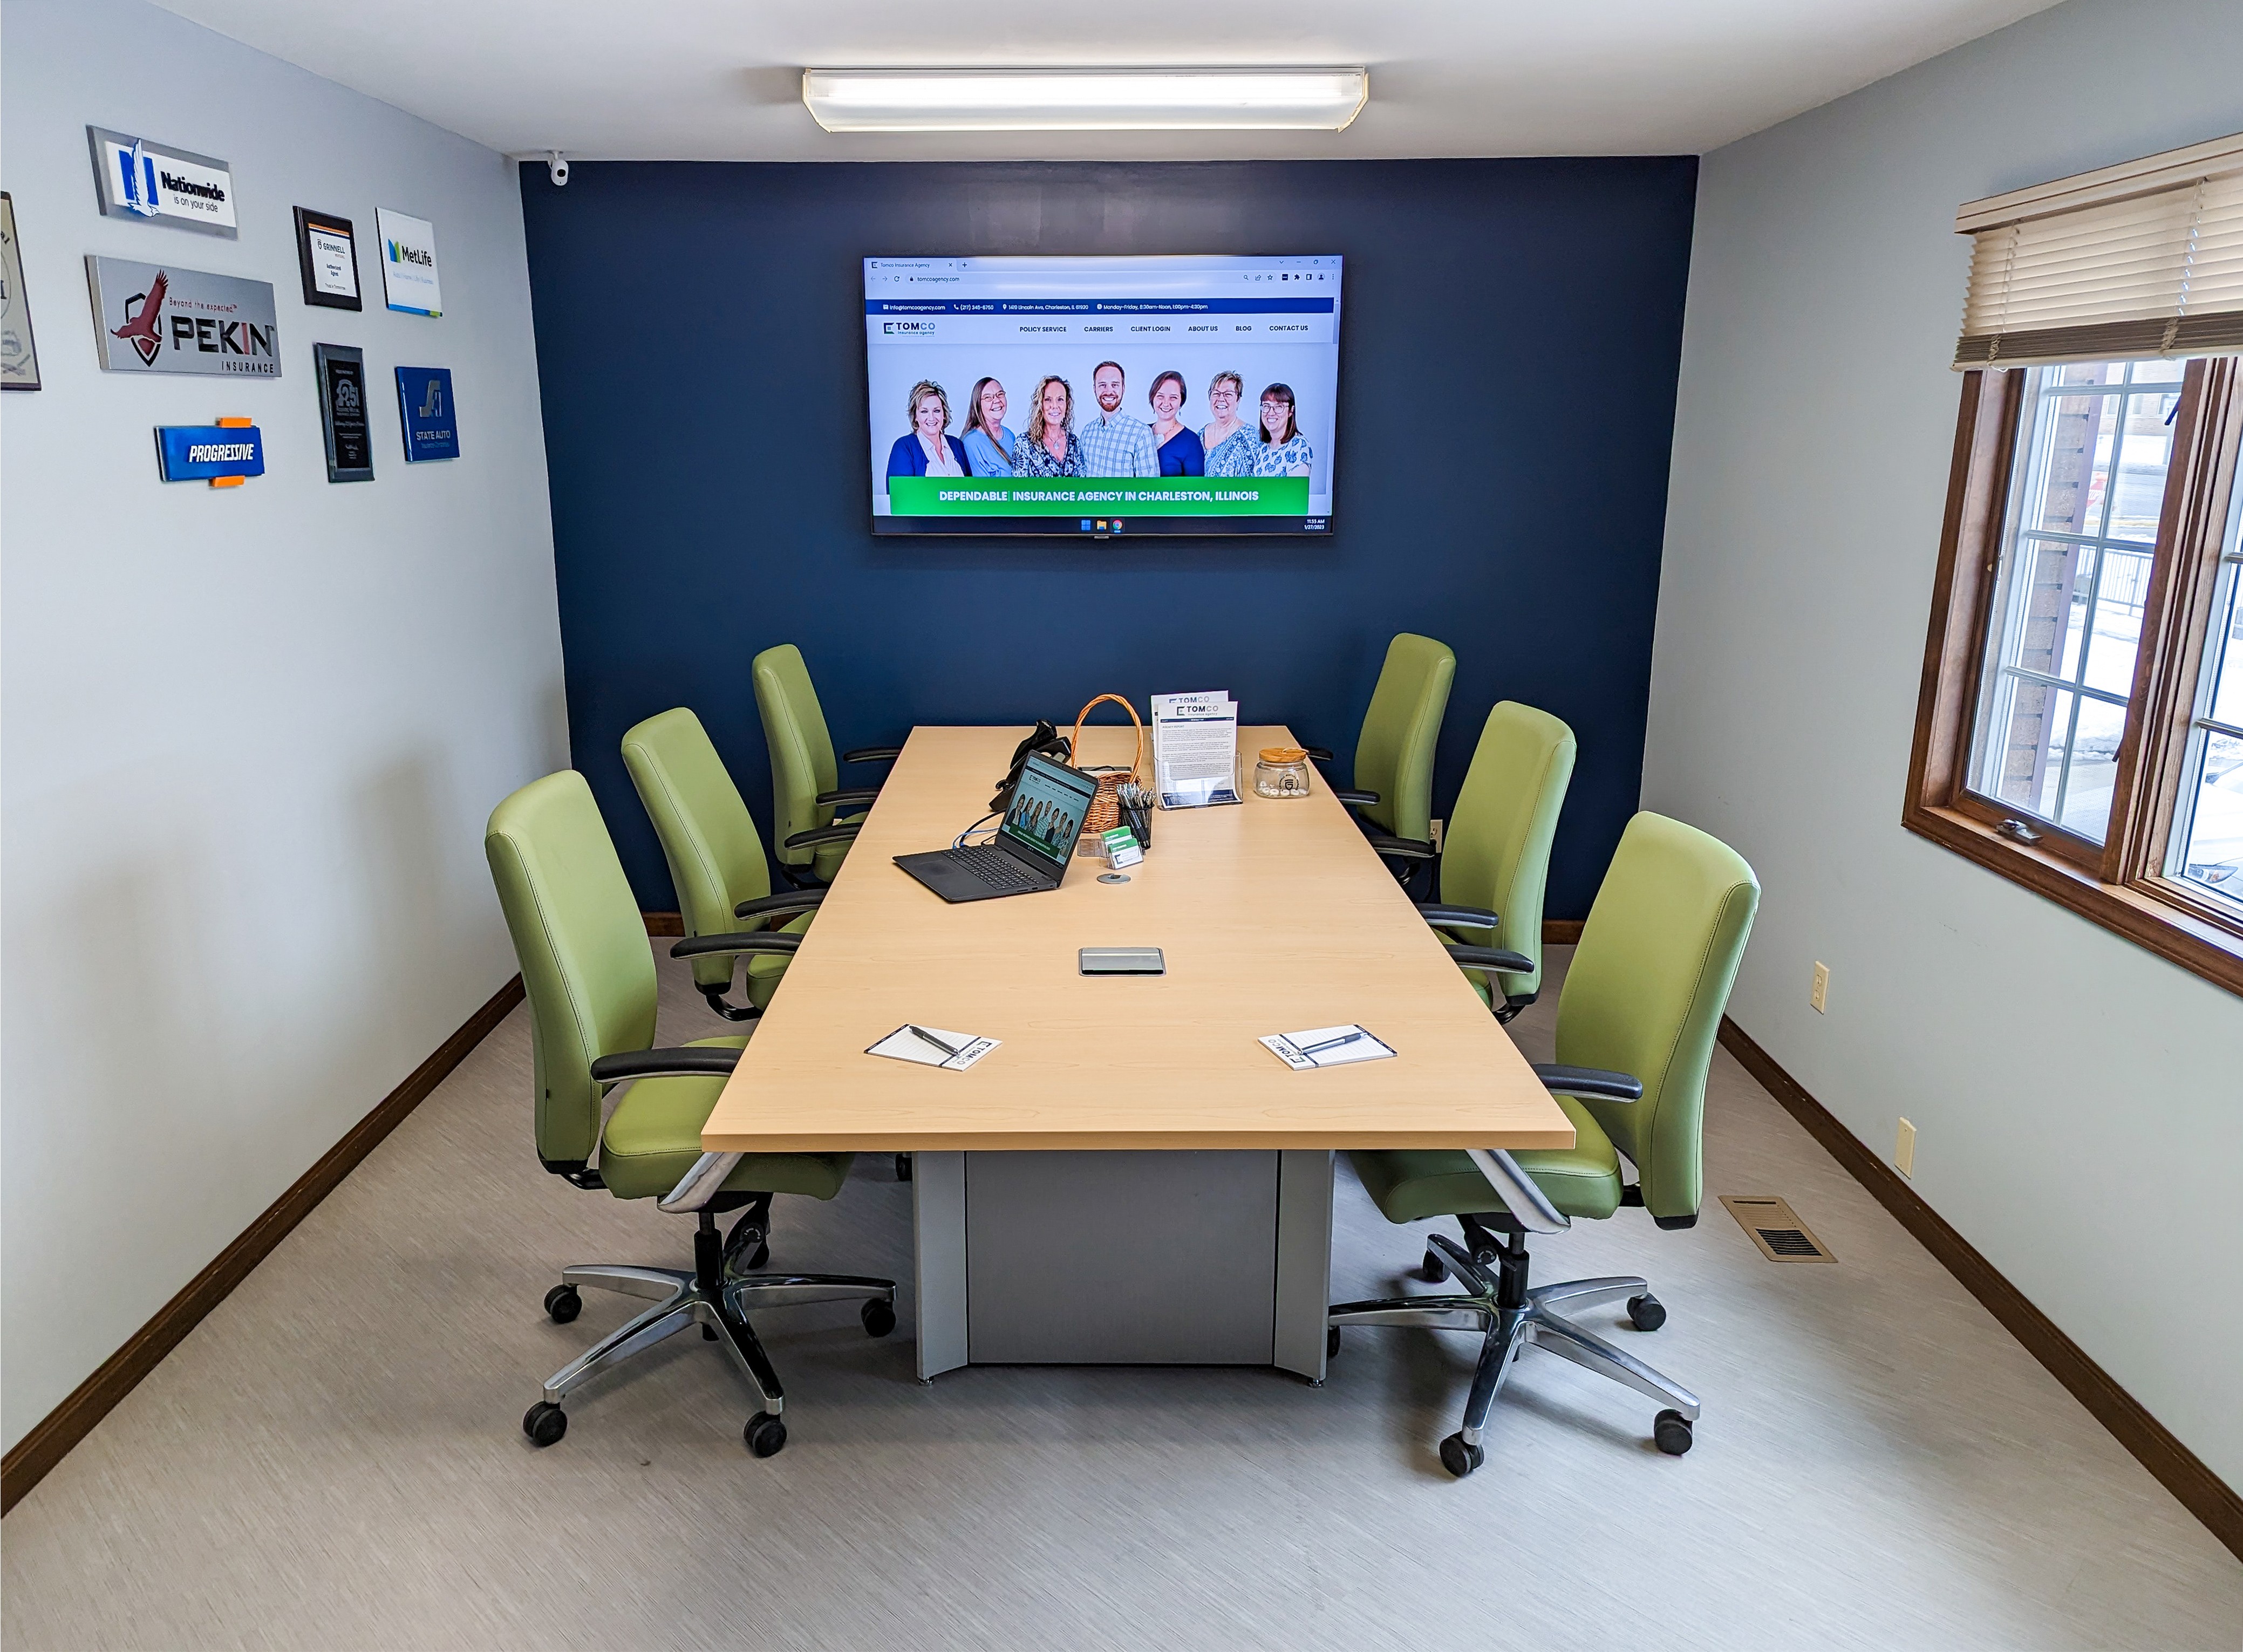 NEW CONFERENCE ROOM